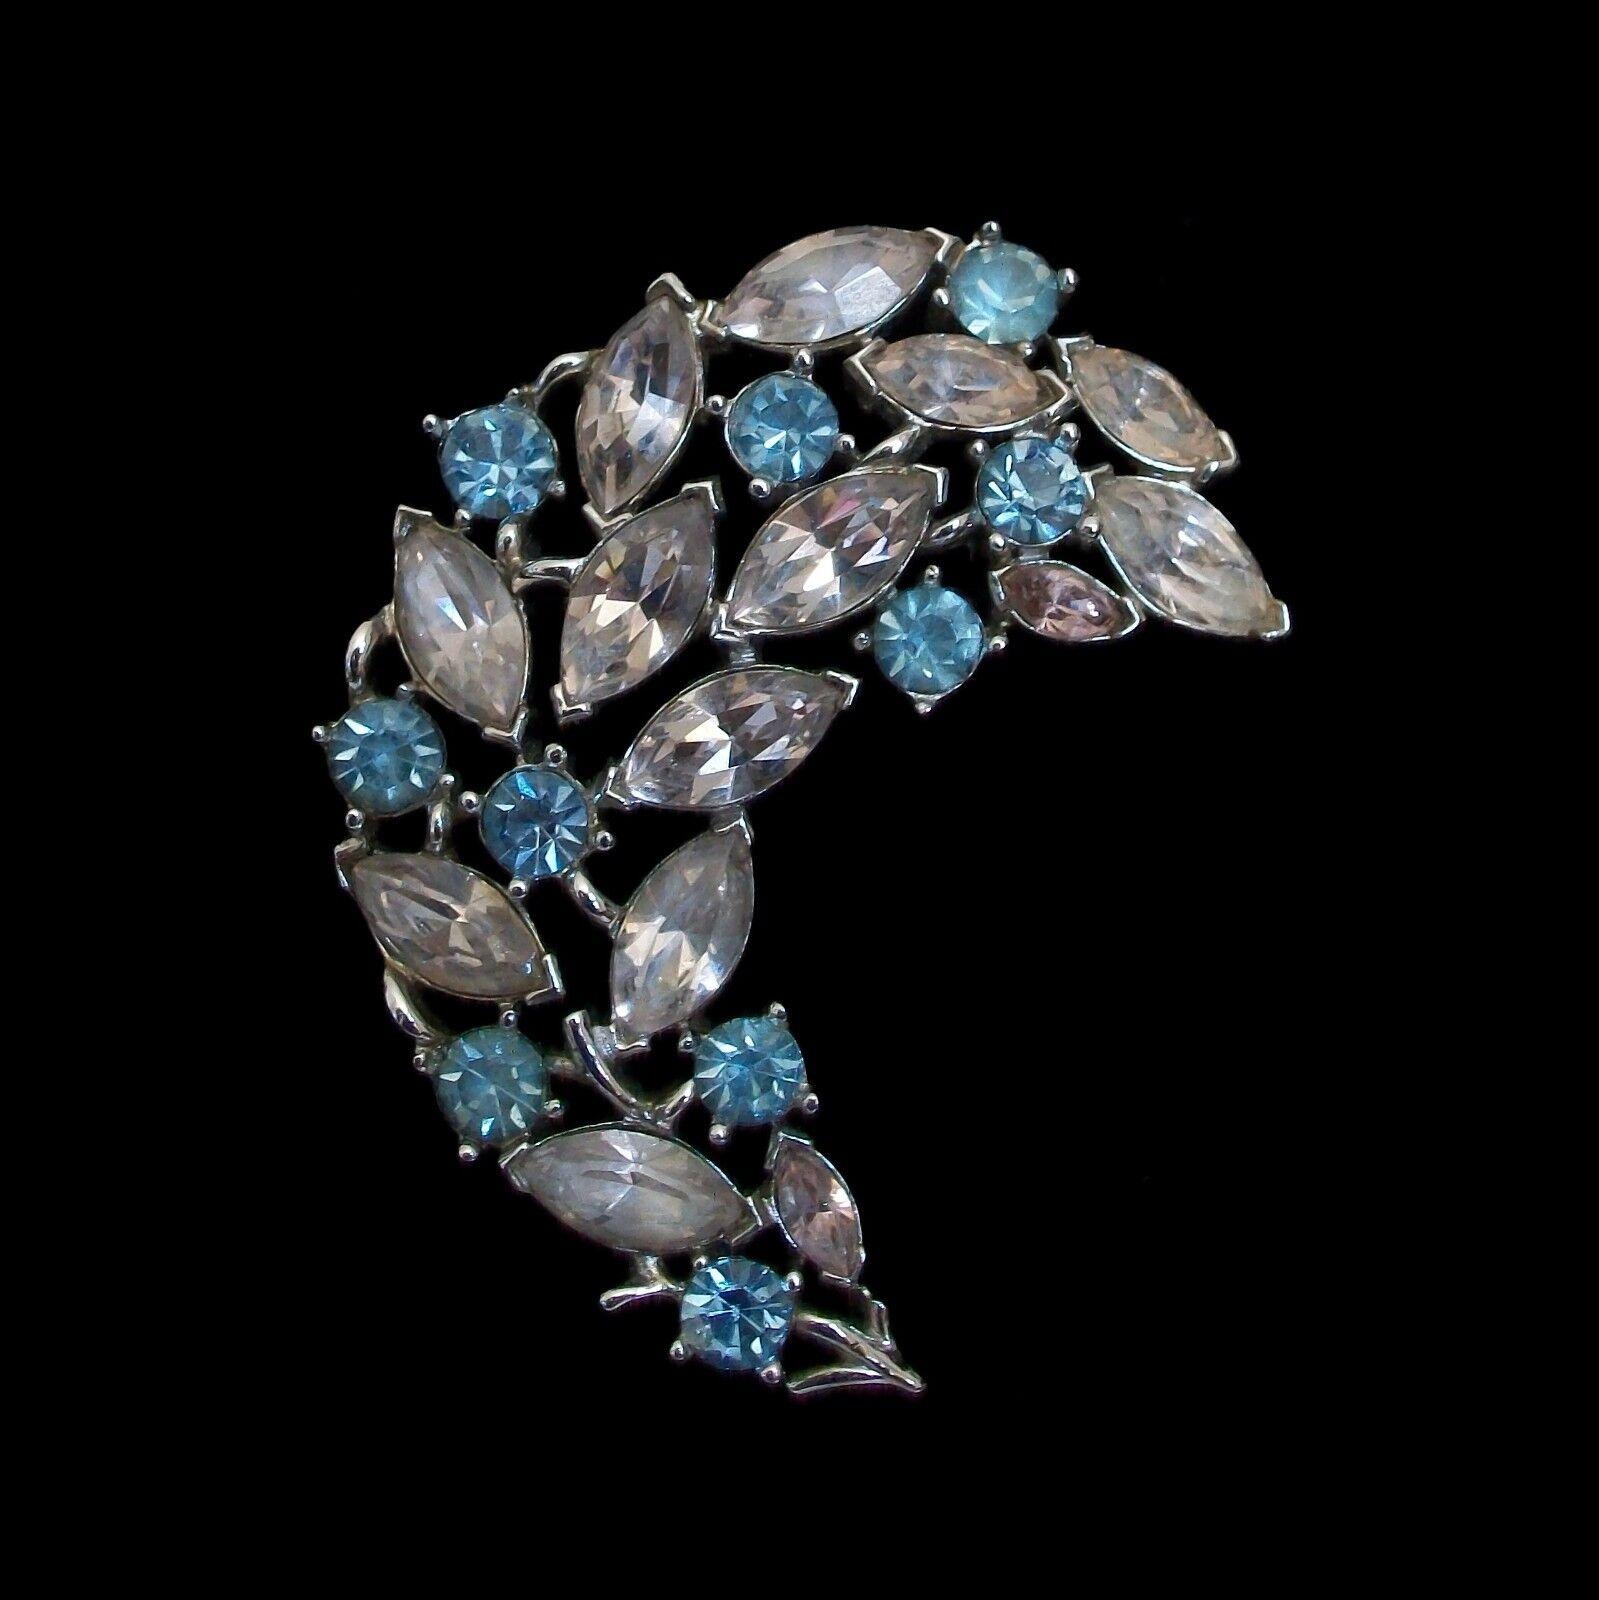 TRIFARI  Alfred Philippe - Rare champagne and blue topaz rhinestone 'feather' brooch - rhodium plated frame and back - original safety catch and pin - signed on the back with a crown over the 'T' - U.S.A. - circa 1939-55.

Excellent/mint vintage